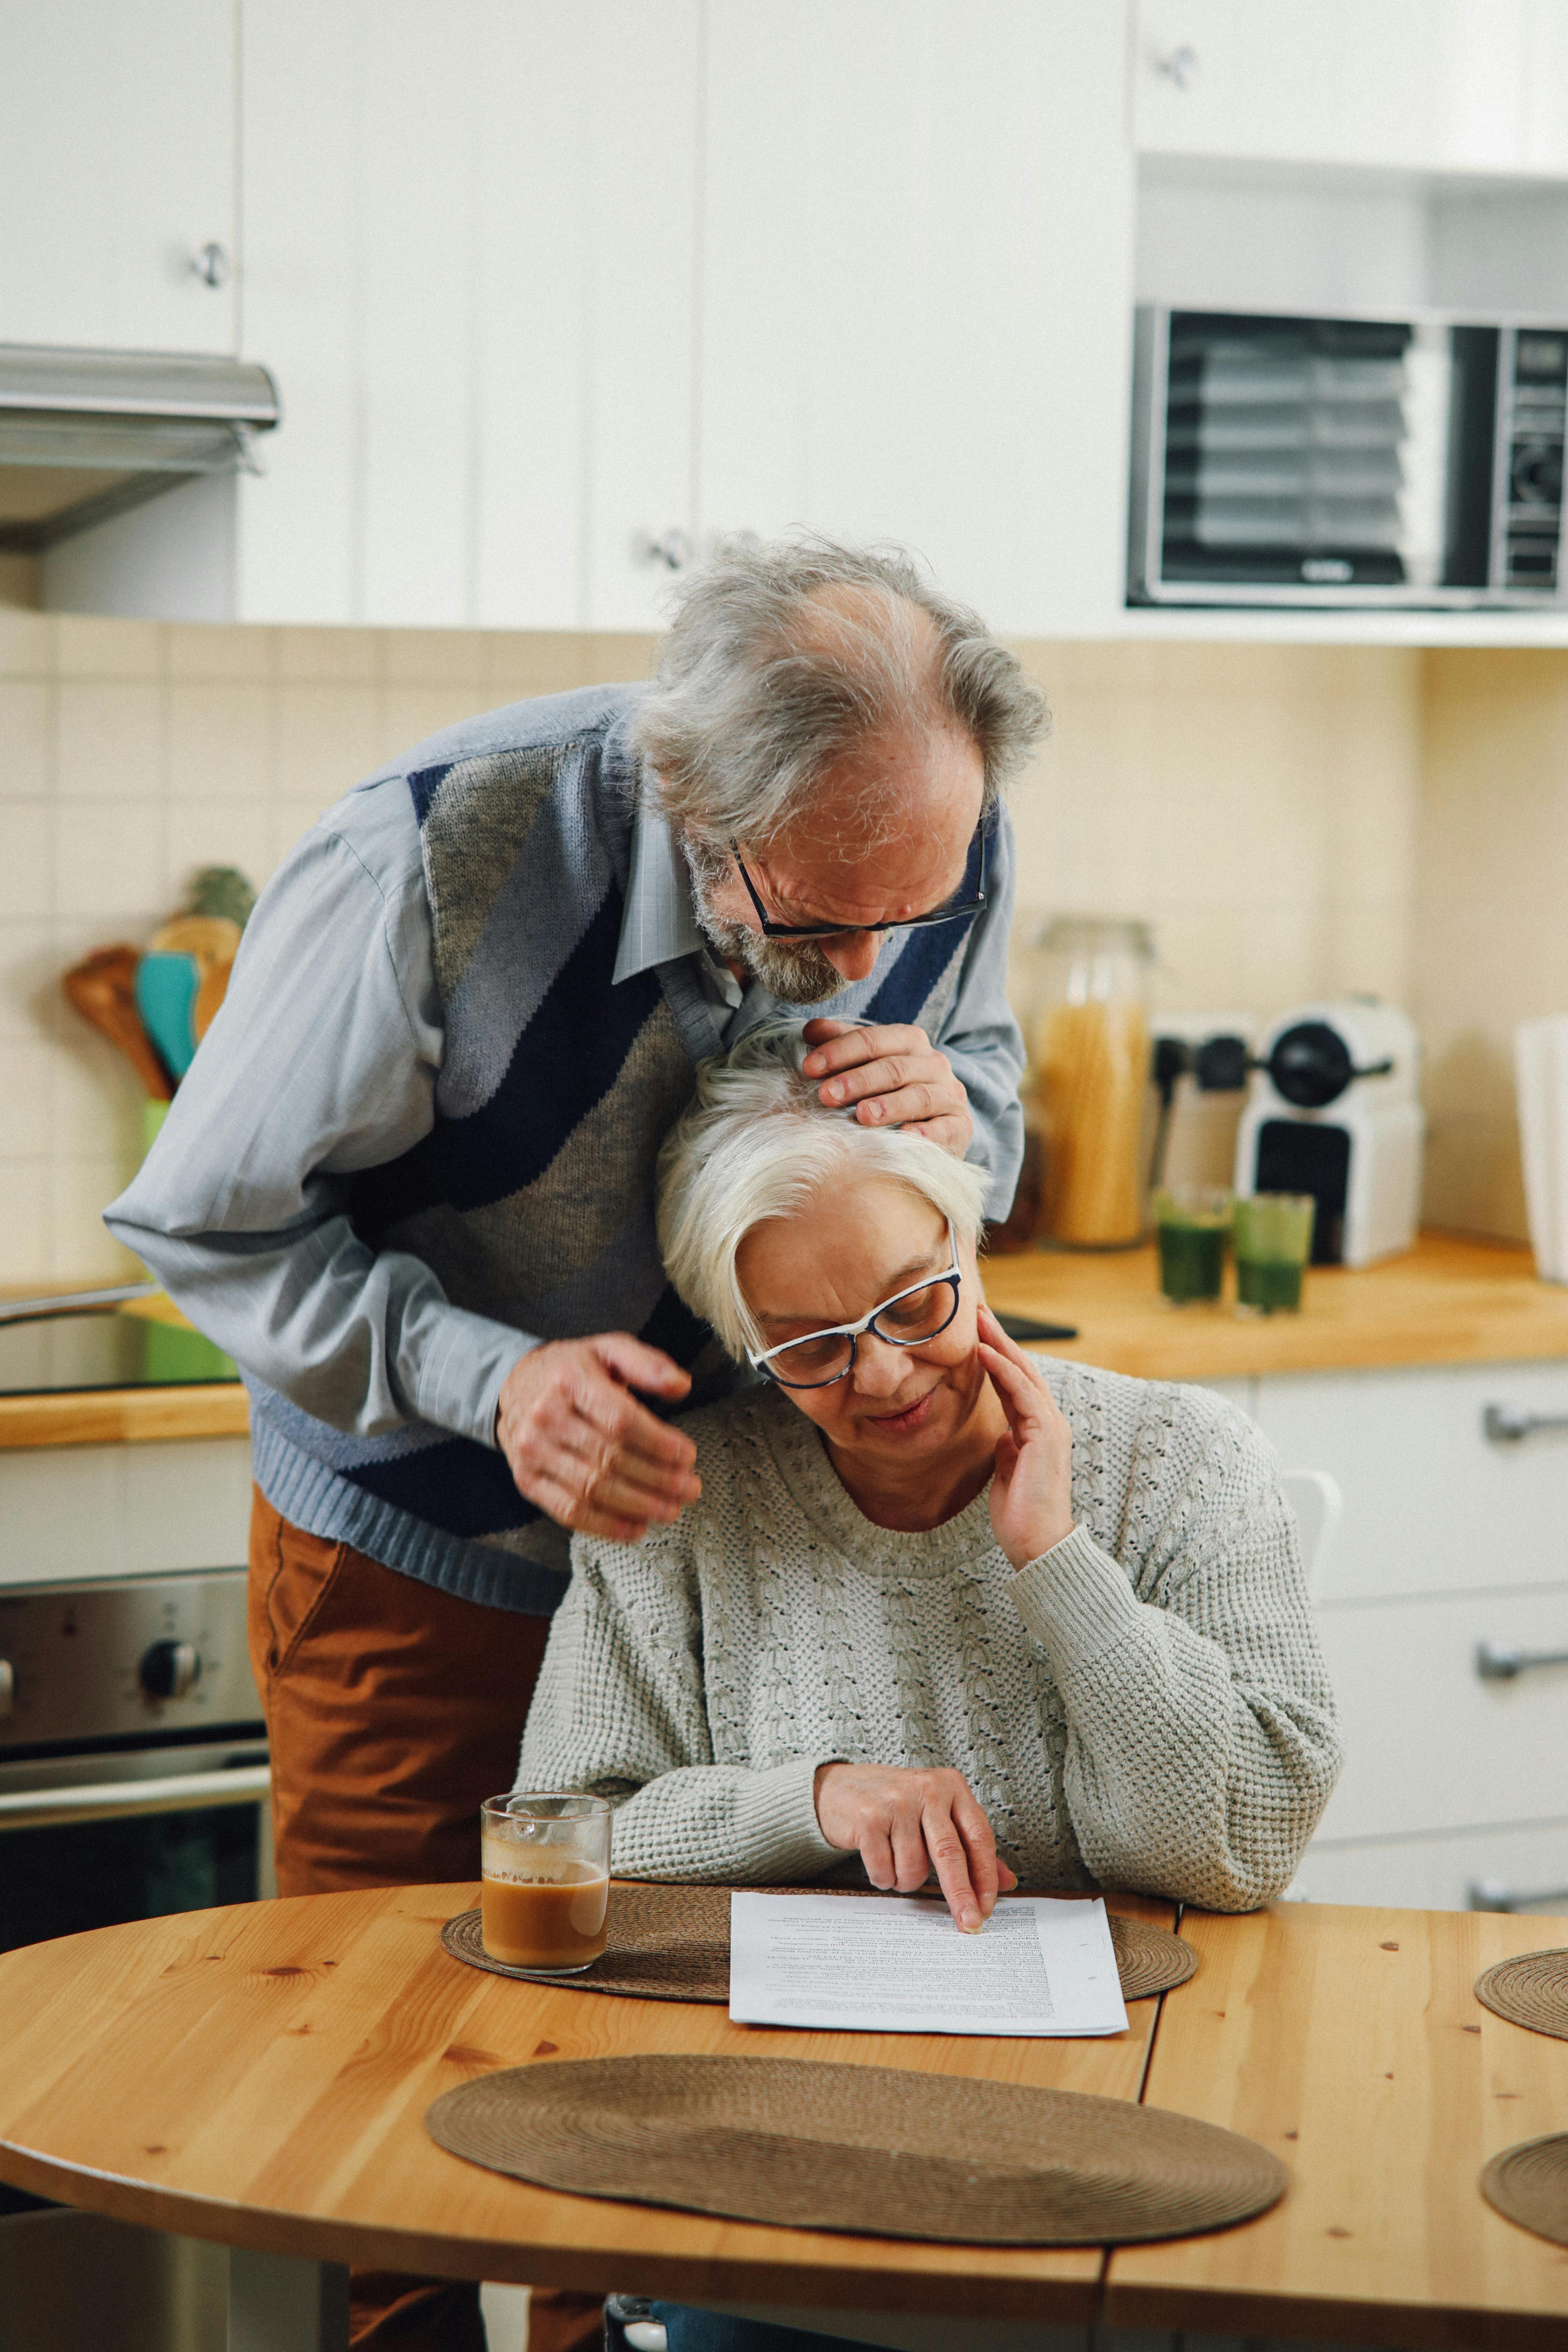 A happy elderly couple in the kitchen | Source: Pexels